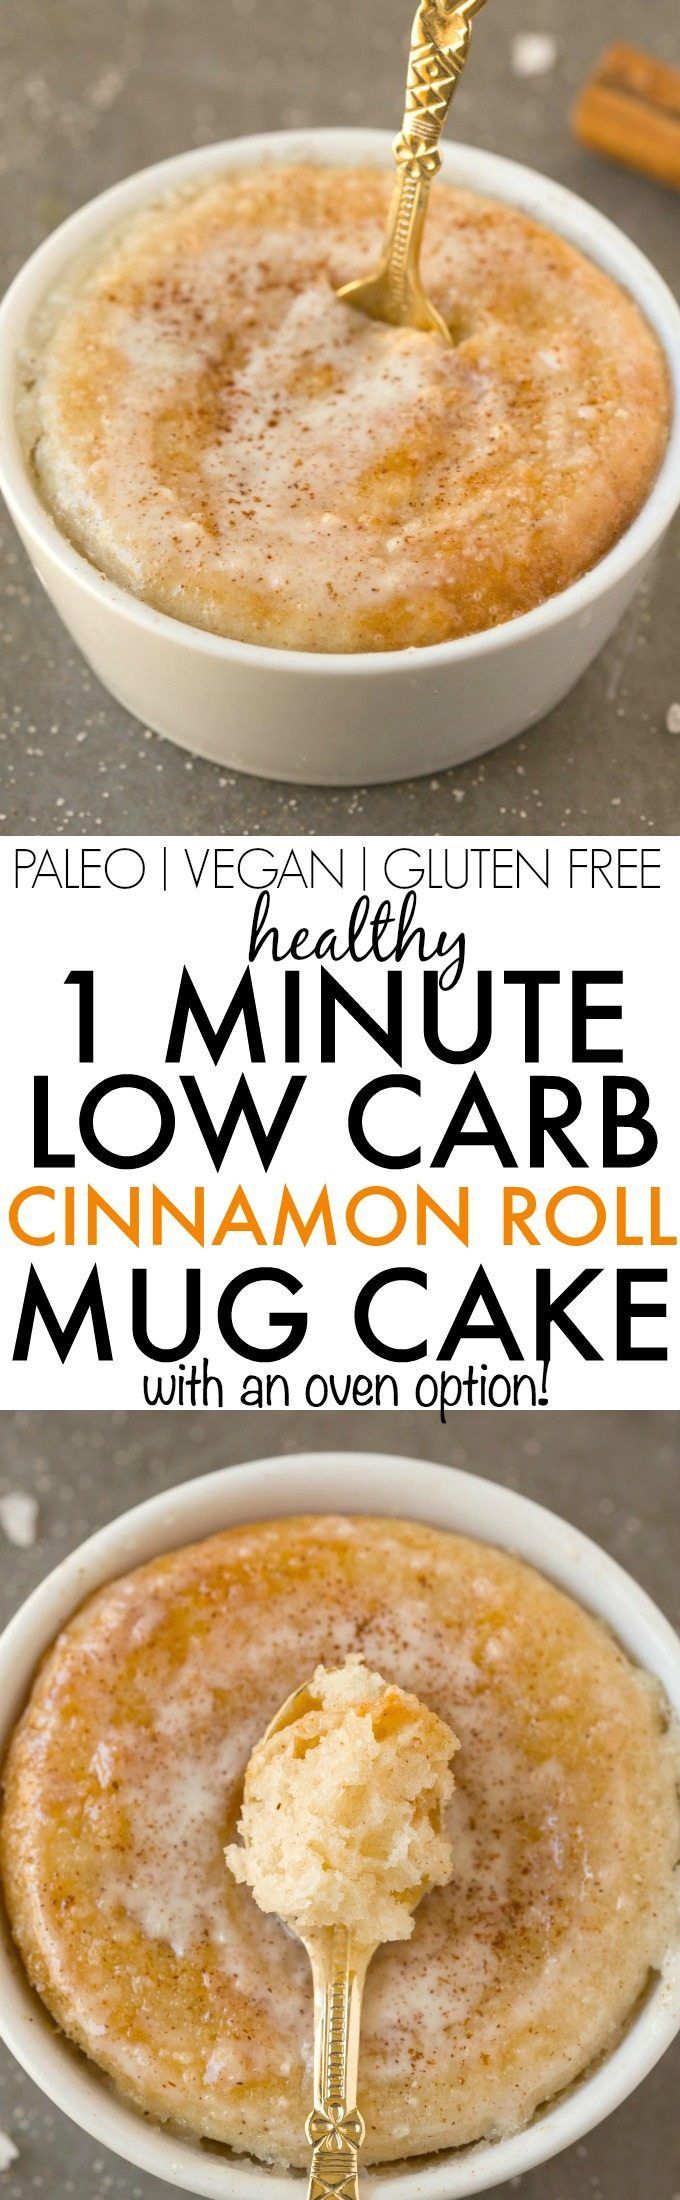 Healthy 1 Minute LOW CARB Cinnamon Roll Mug Cake- Light, fluffy and moist in the inside! Single servinf and packed full of protein